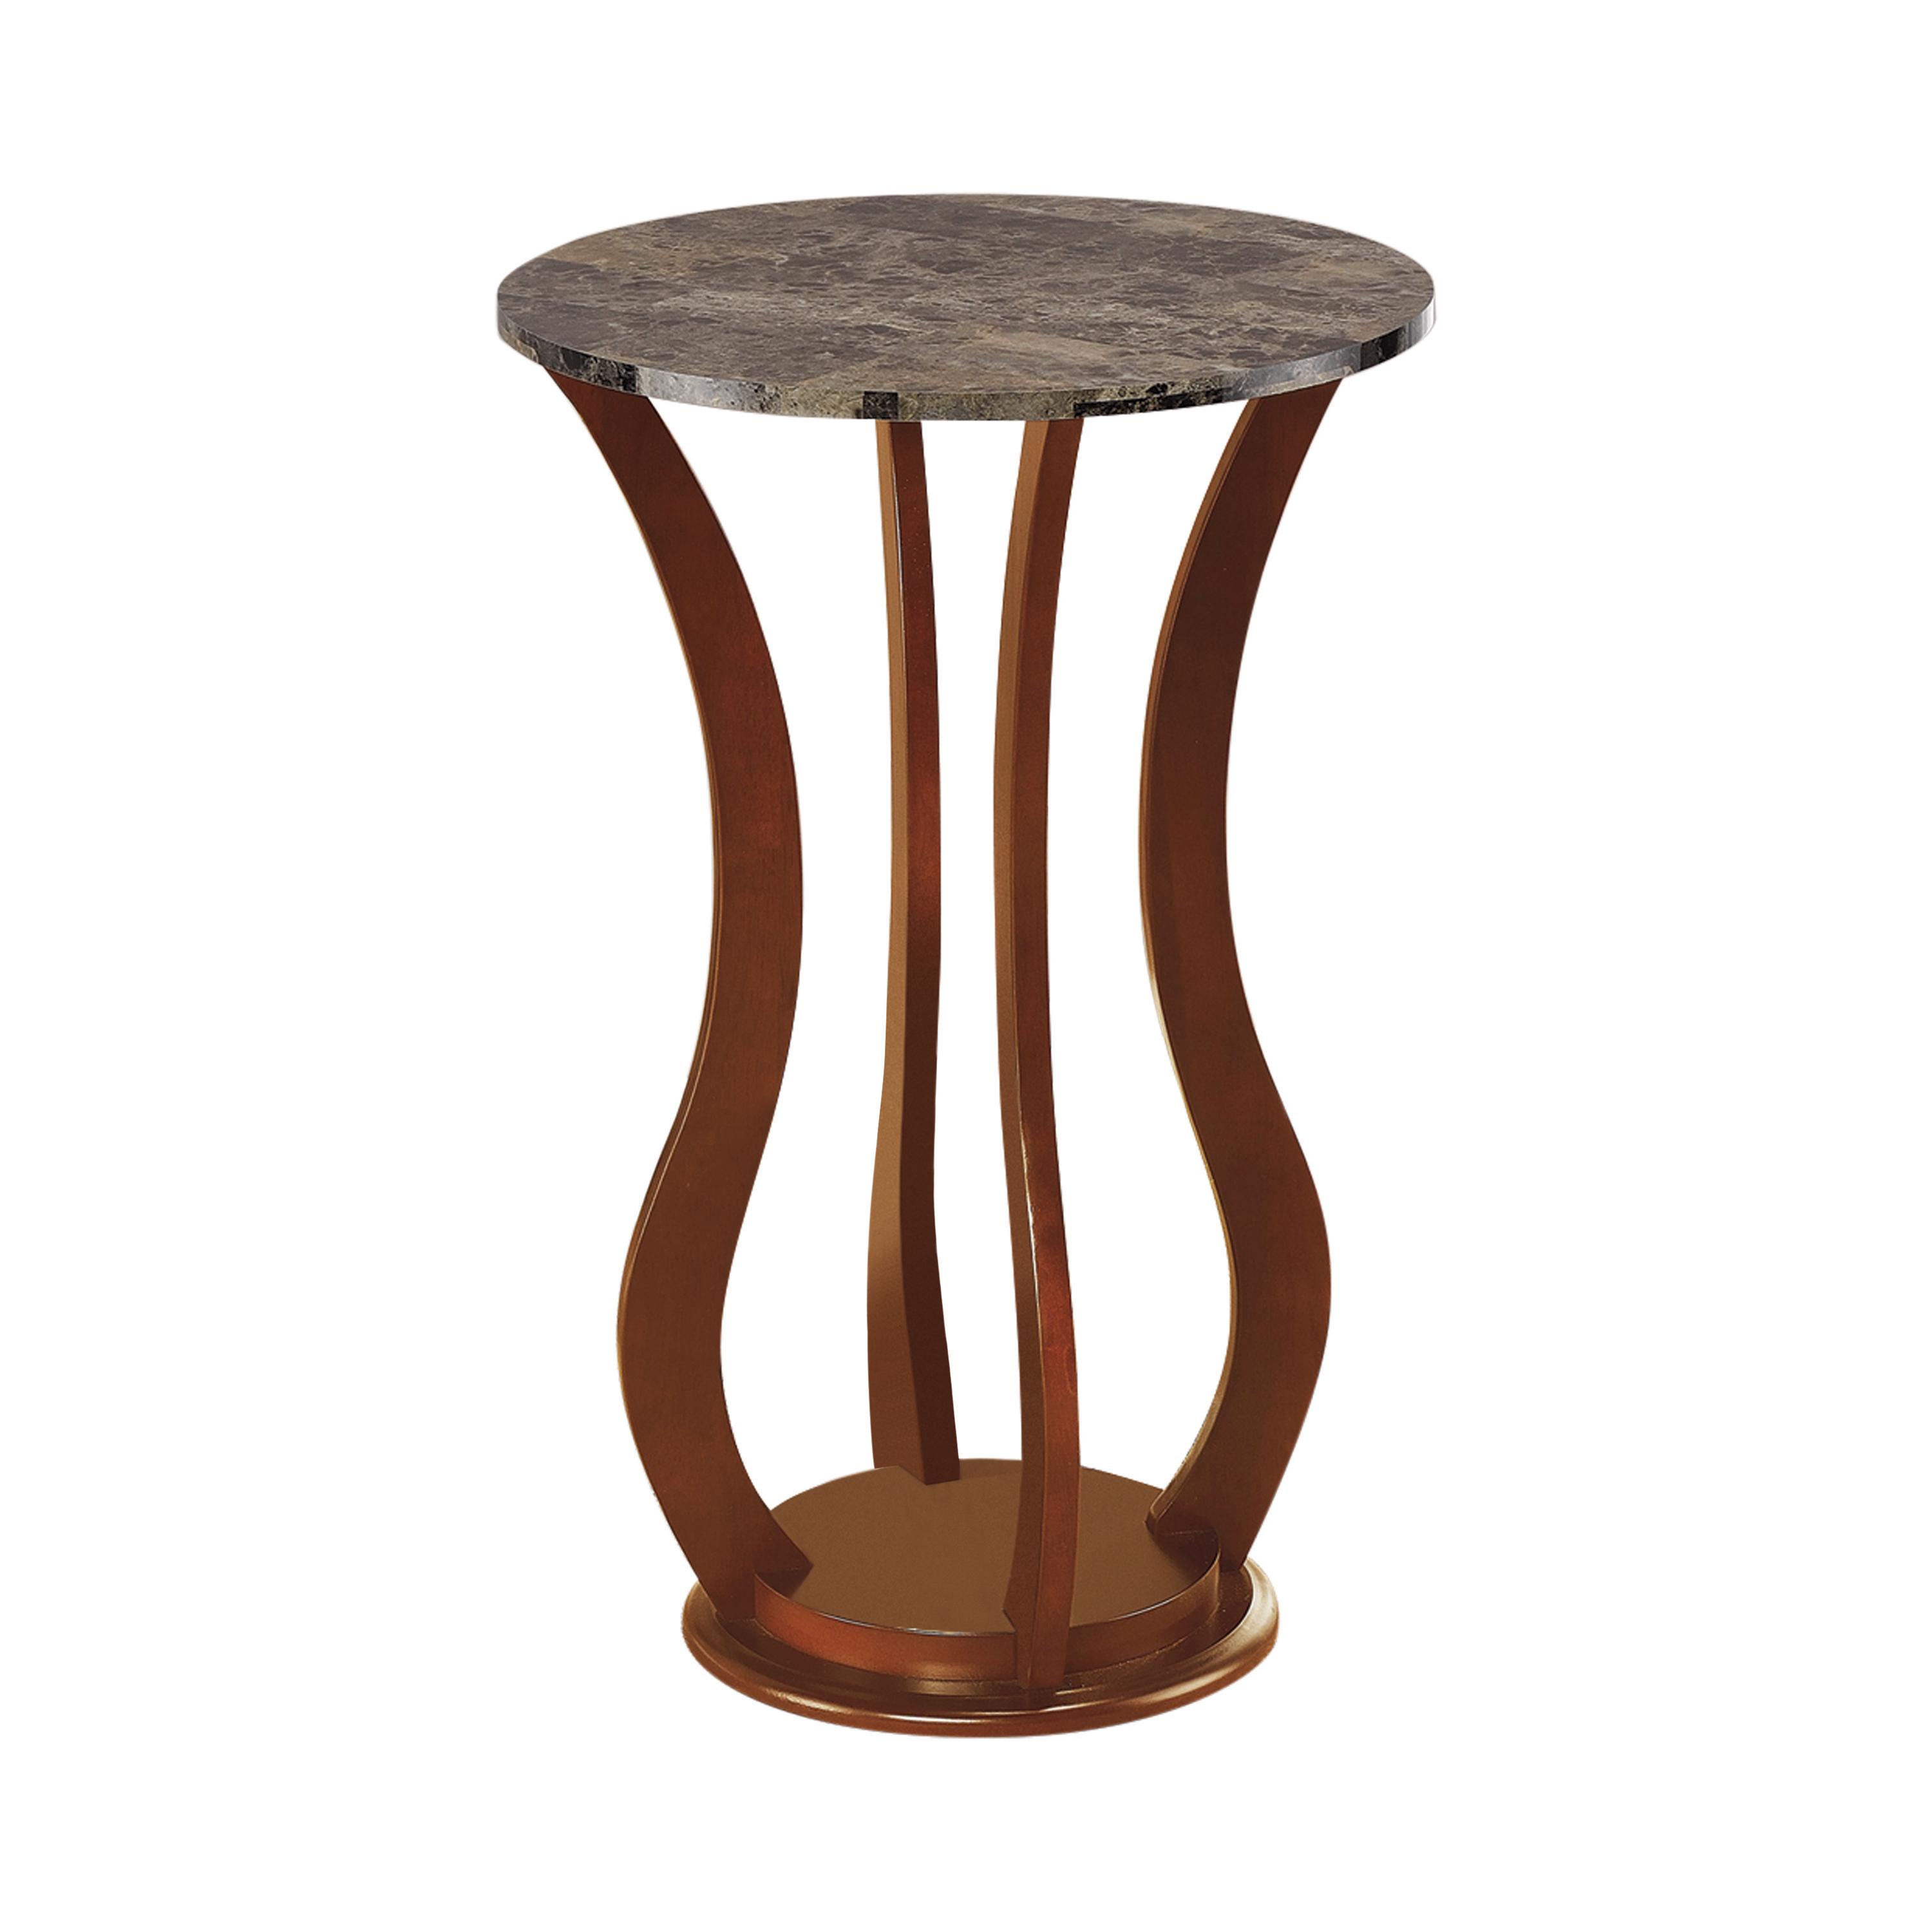 Transitional Accent Table 900926 900926 in Brown 